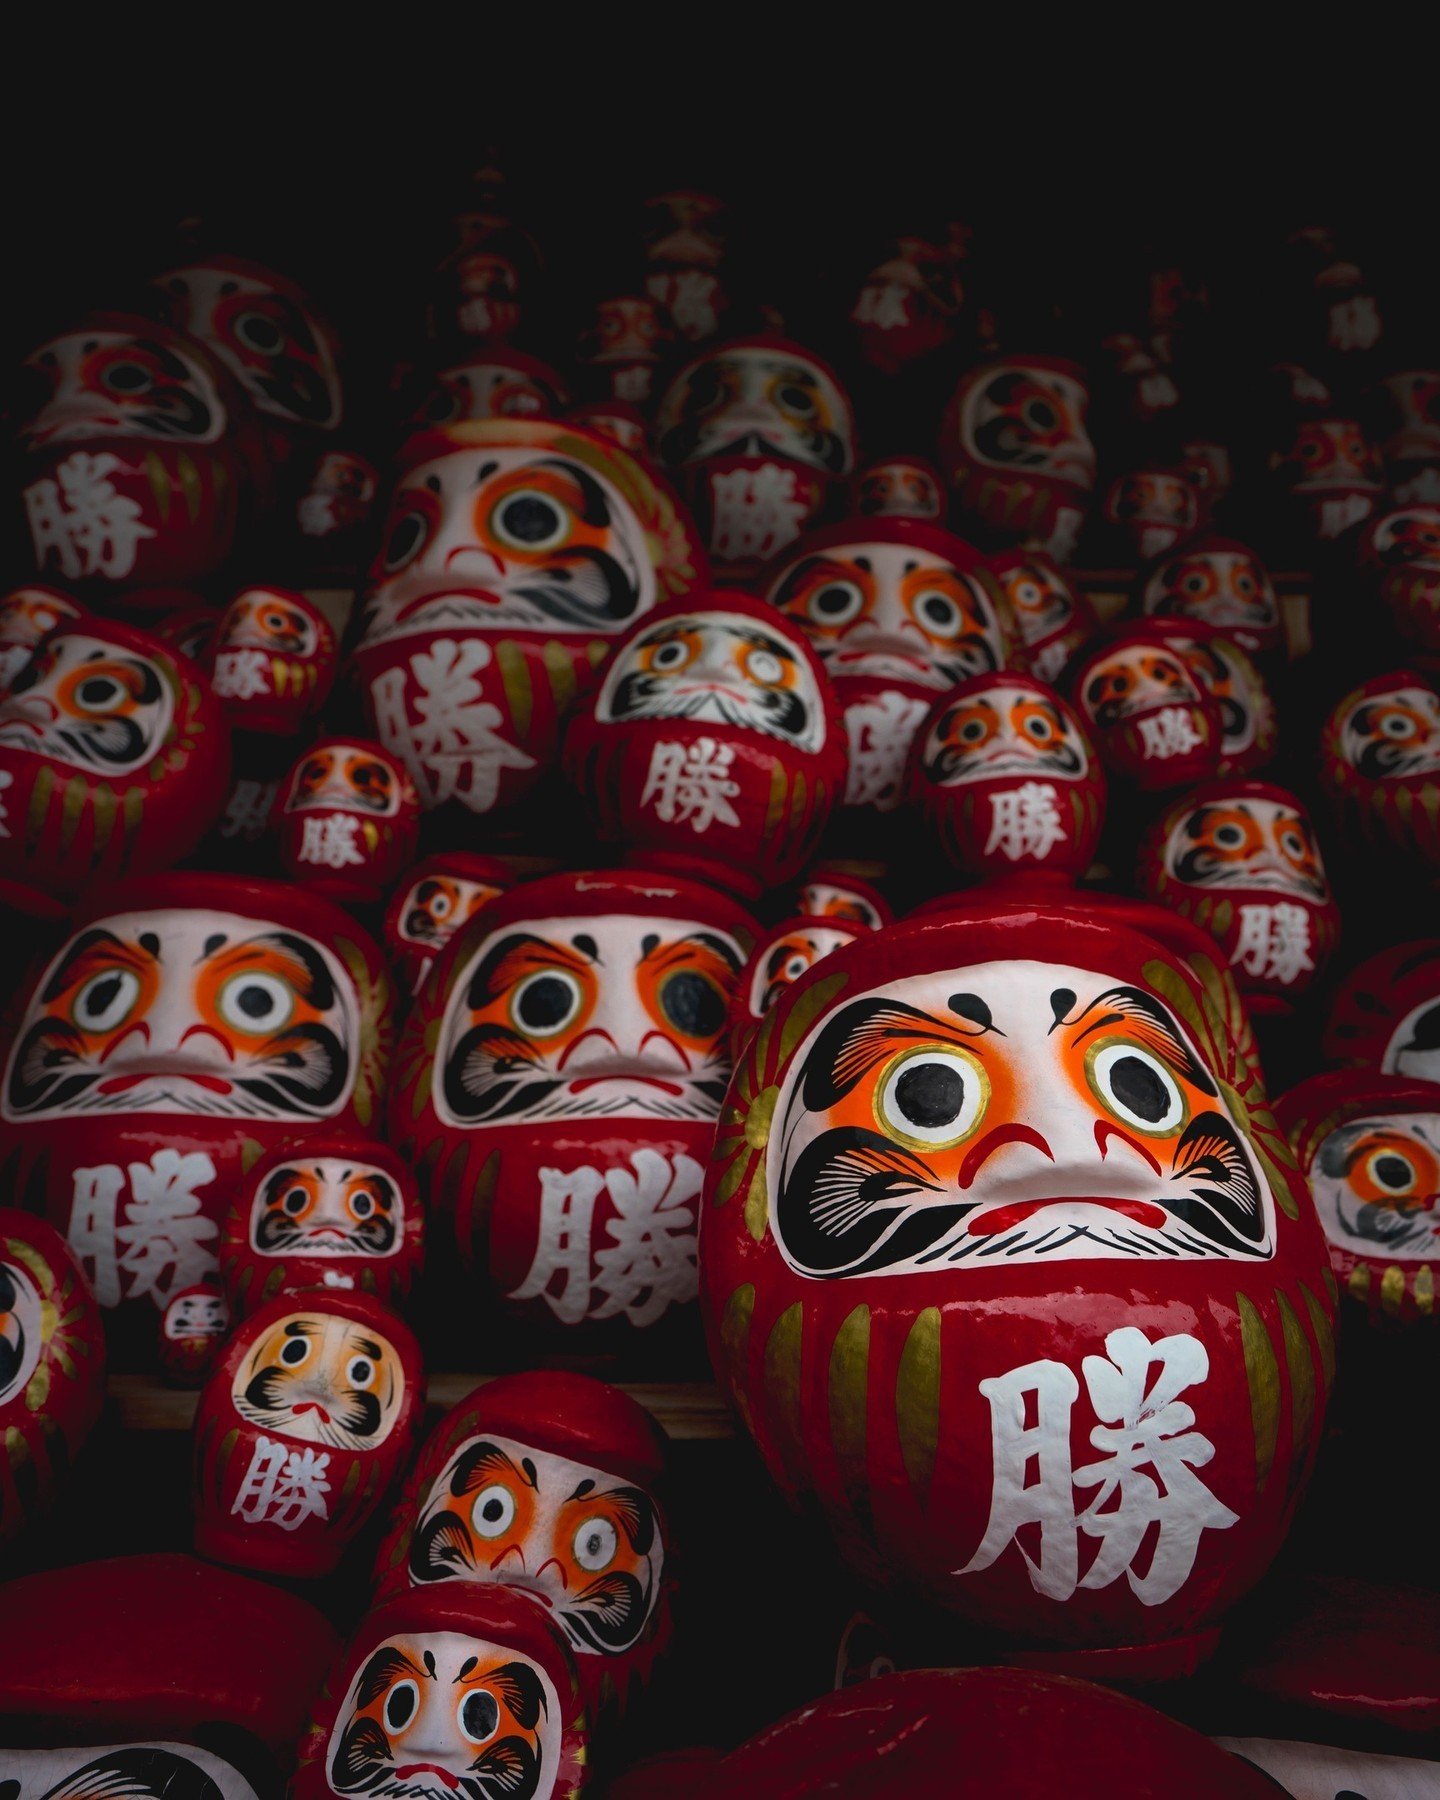 Tucked away in the idyllic nature of Minoo (just north of Osaka City) lies Katsuoji Temple, famed for its ancient, lucky history. ⁠
⁠
Visitors today will find the temple grounds scattered with daruma dolls of all sizes, which are considered to be Jap